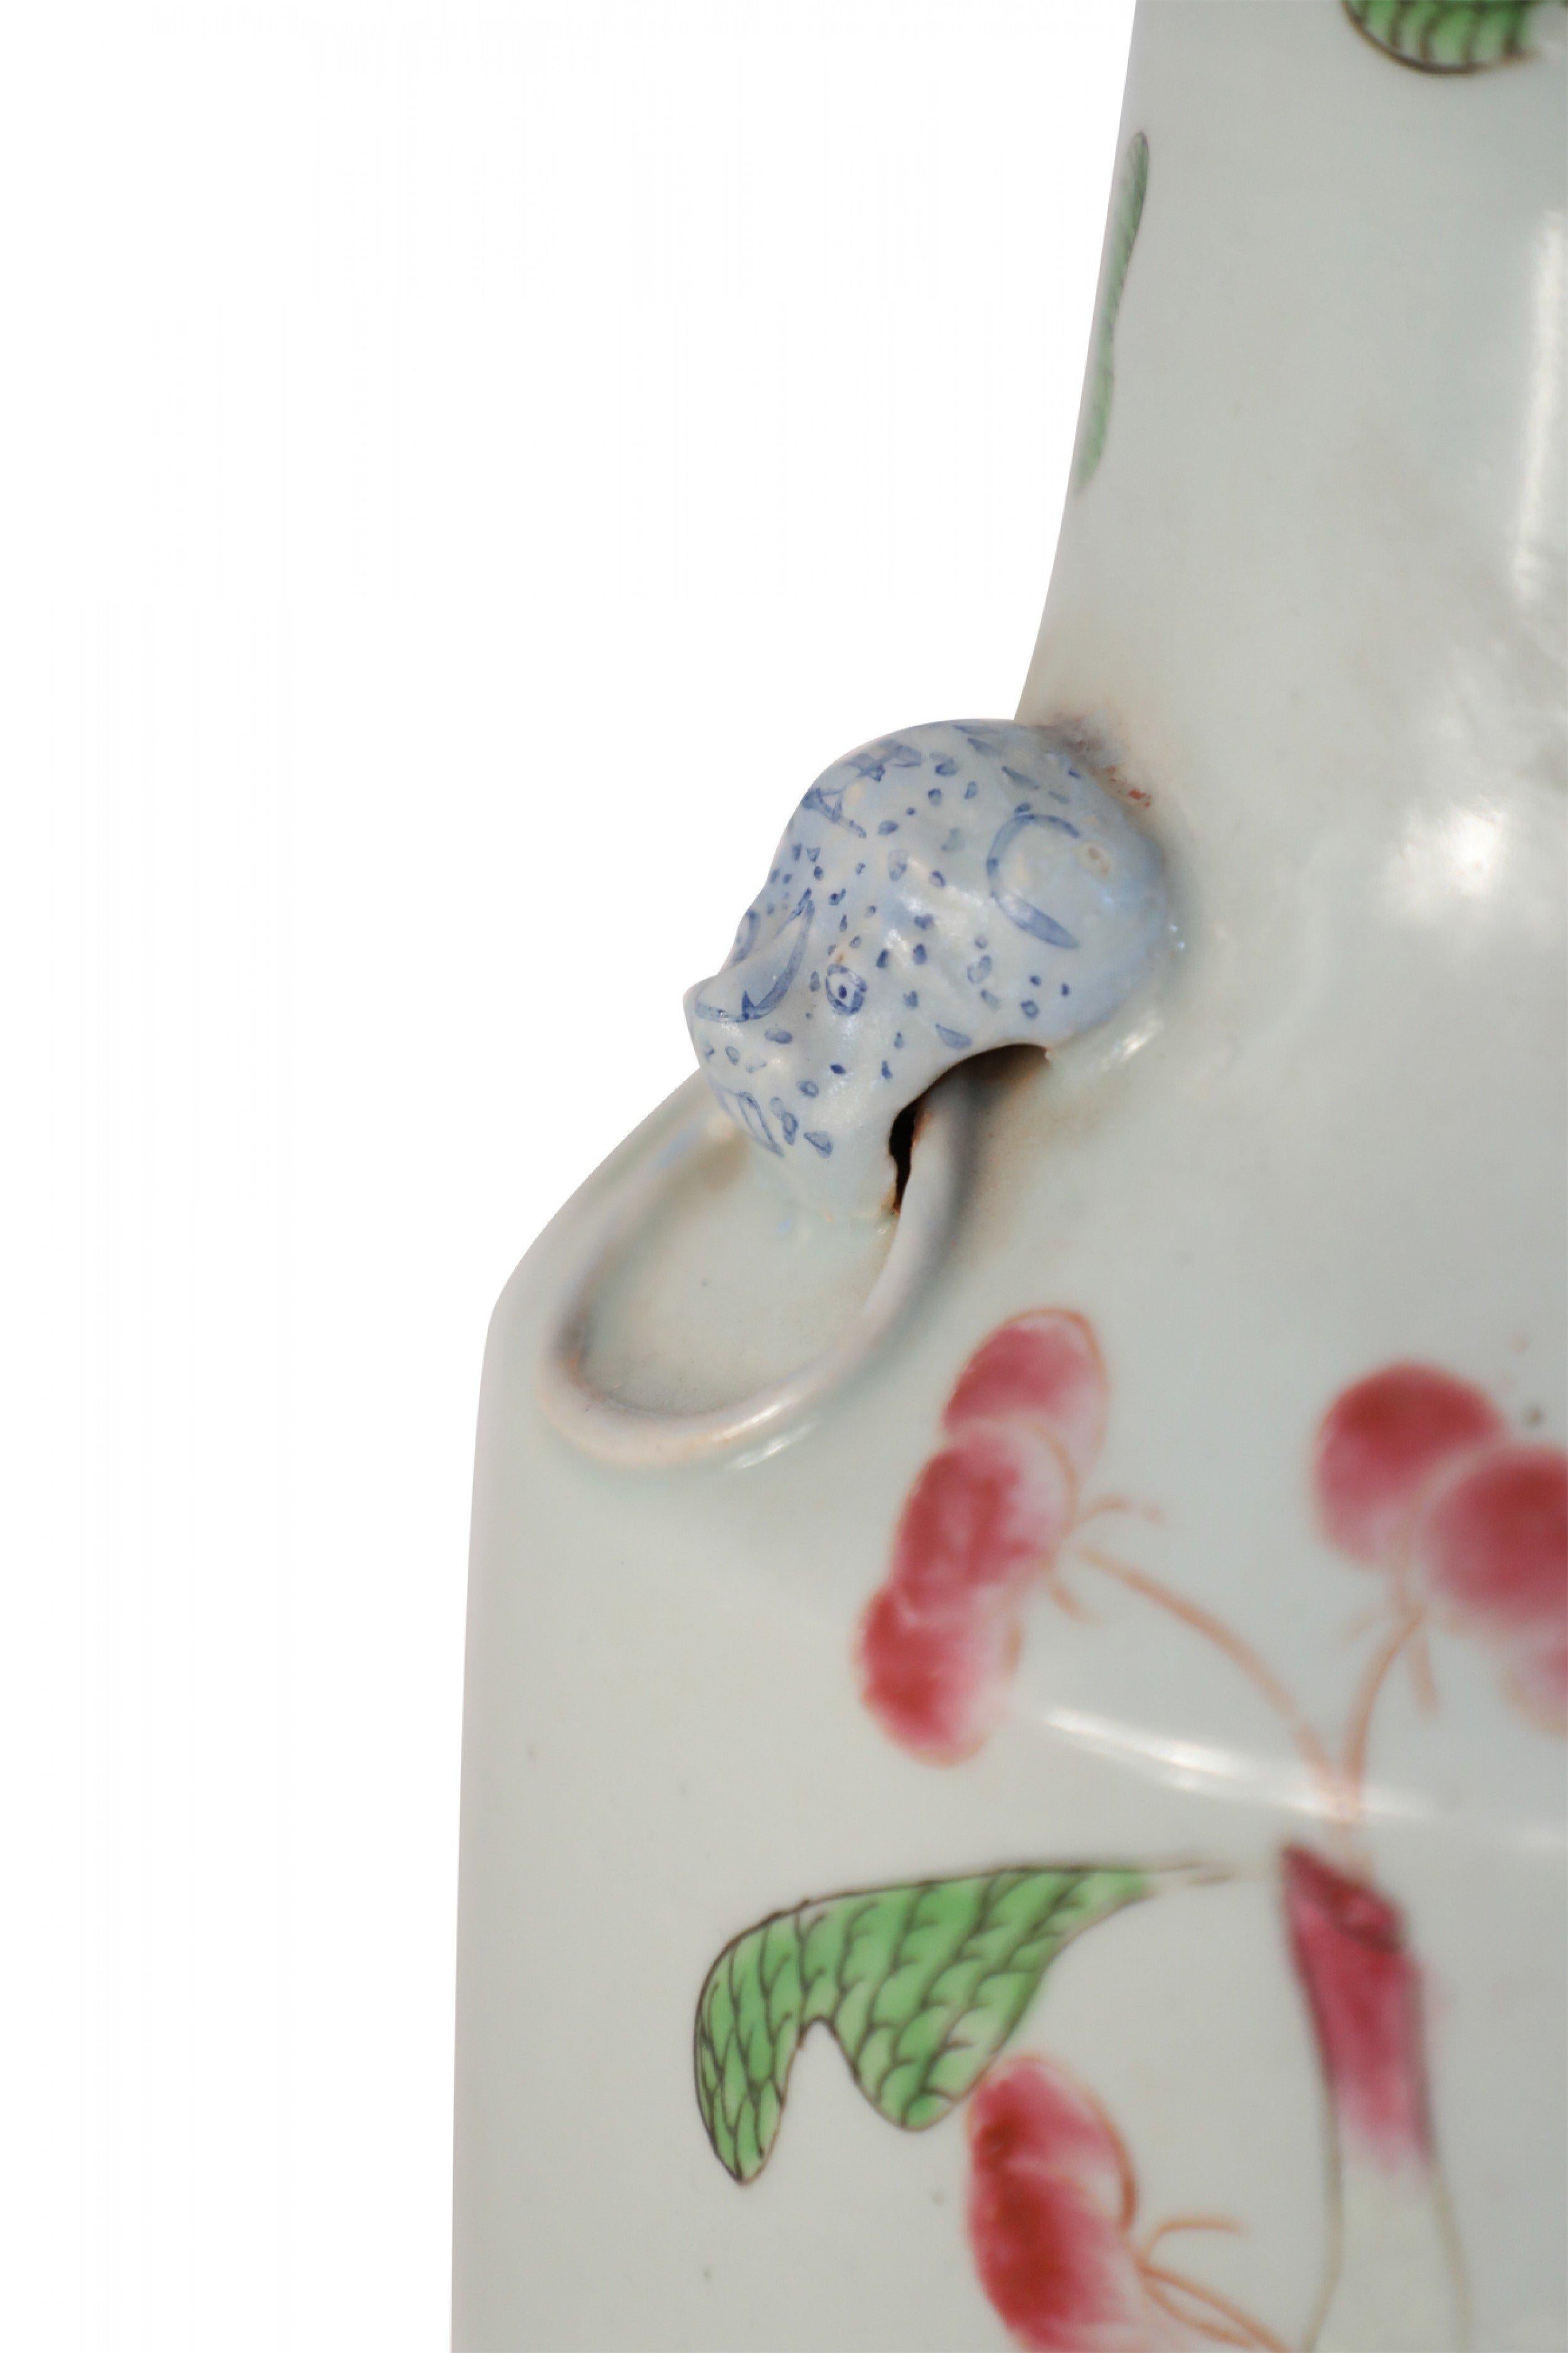 Chinese white porcelain urn decorated with dark pink cherry blossom branches growing up its form, and accented with white foo dog doorknocker ornamentation along the neck.
      